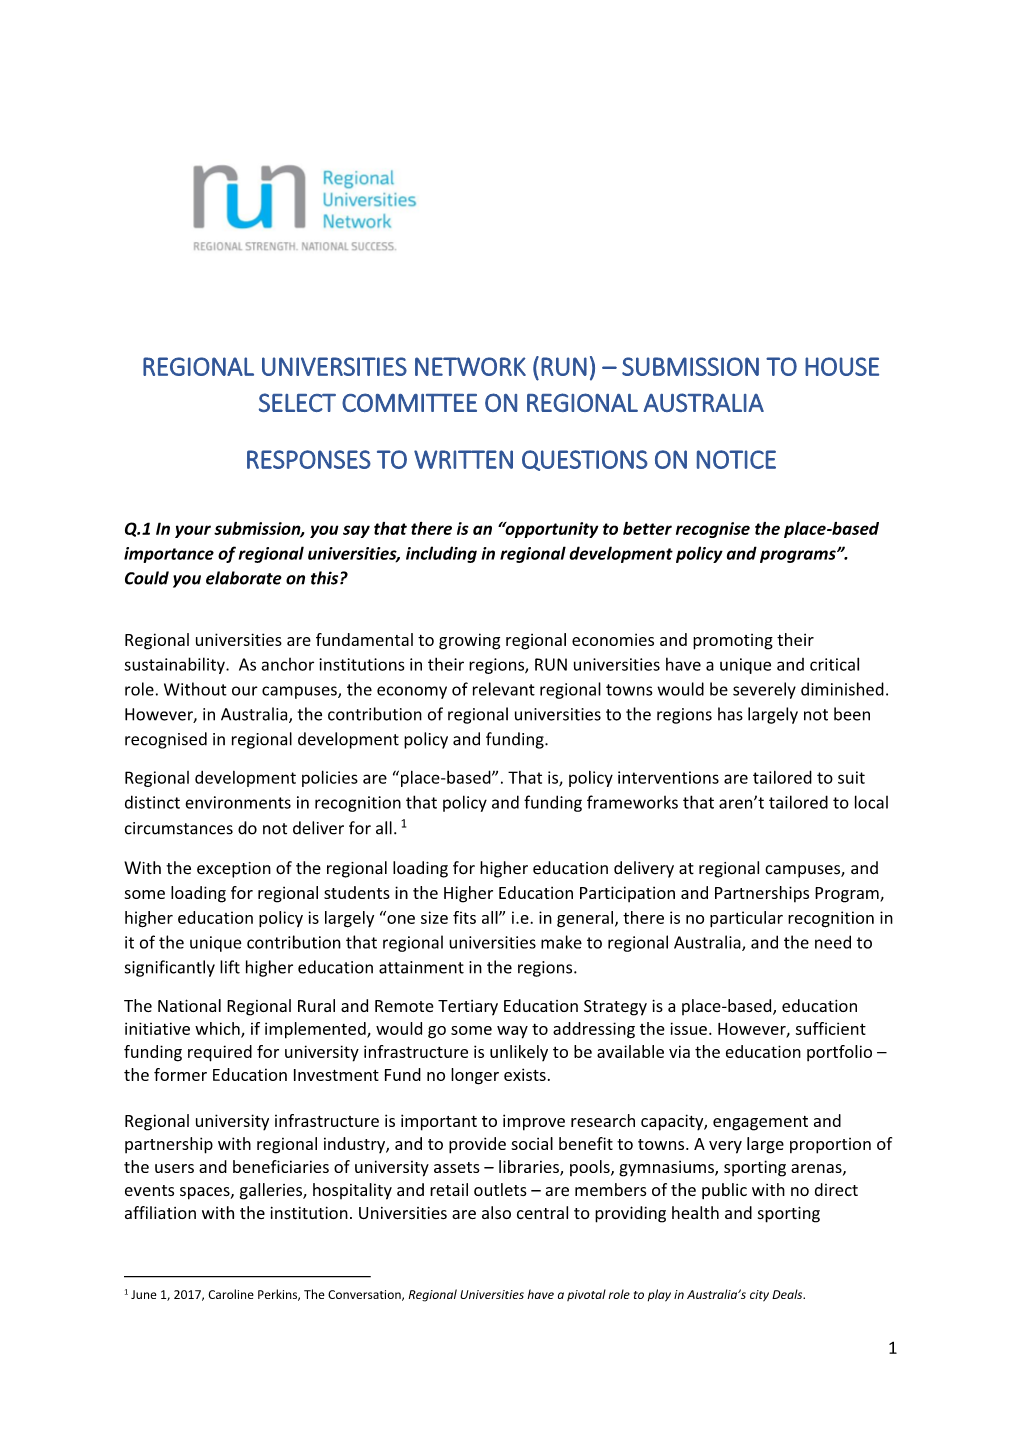 Regional Universities Network (Run) – Submission to House Select Committee on Regional Australia